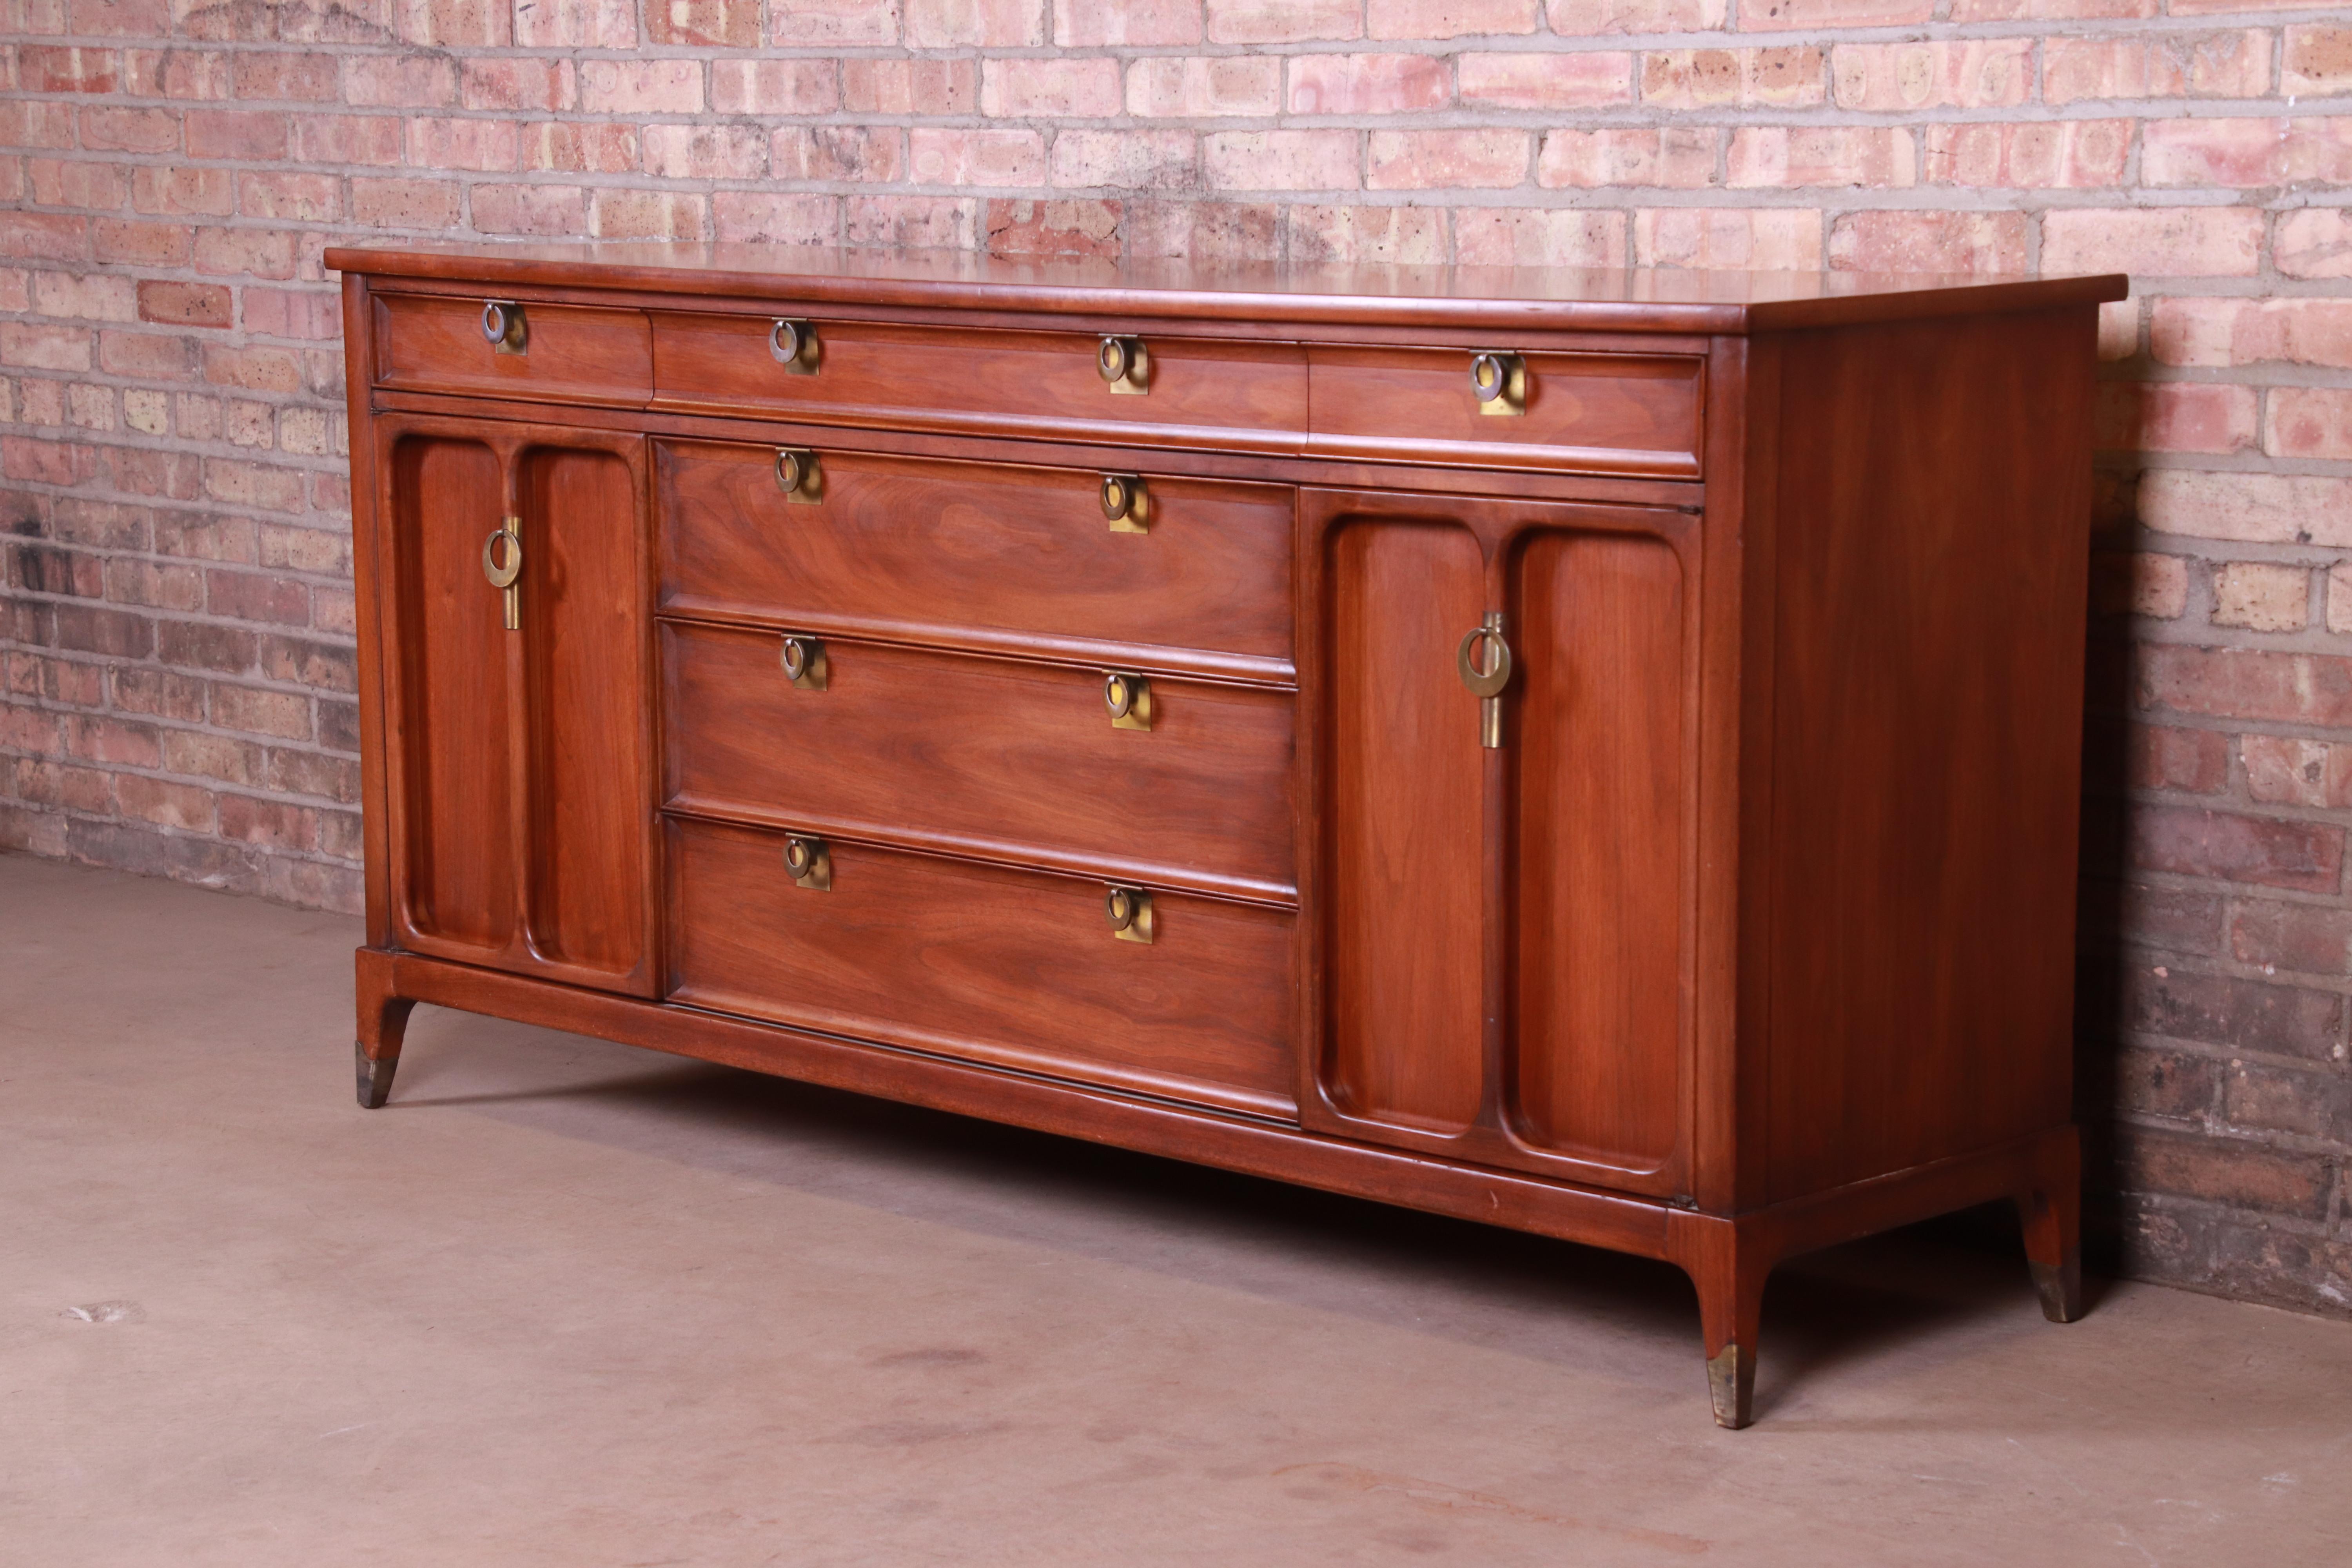 American Mid-Century Modern Walnut Sideboard or Credenza by White Furniture, circa 1960s